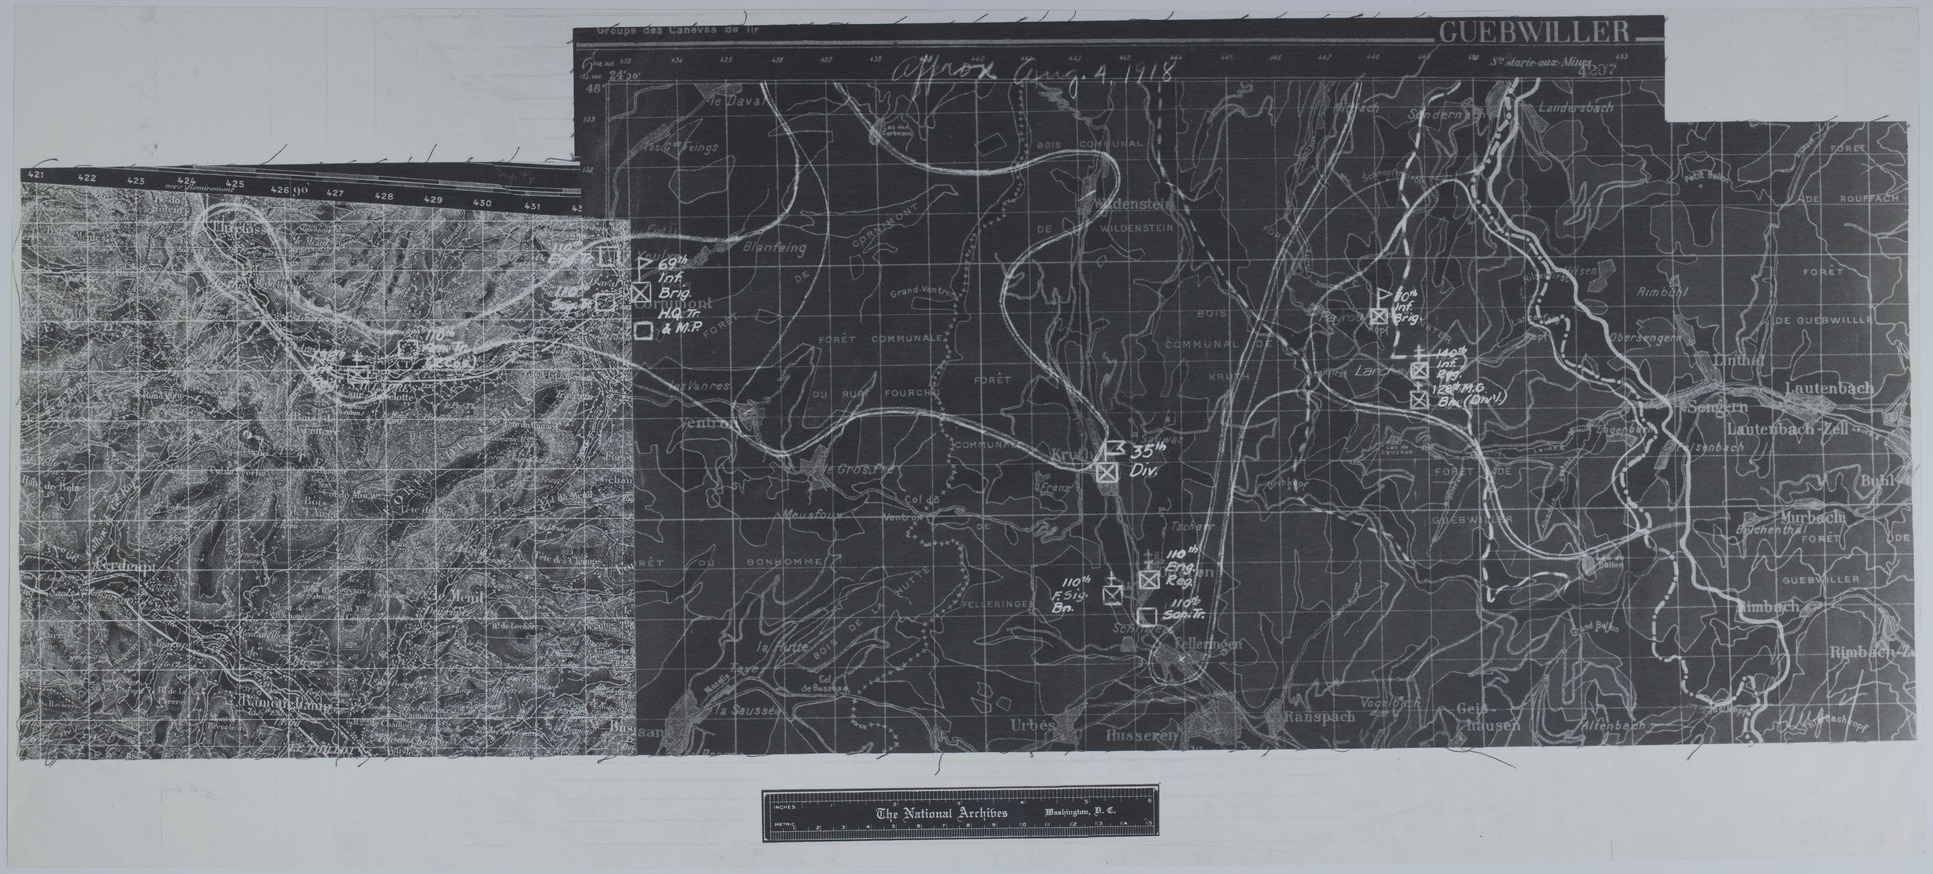 Map of 35th Division Positions